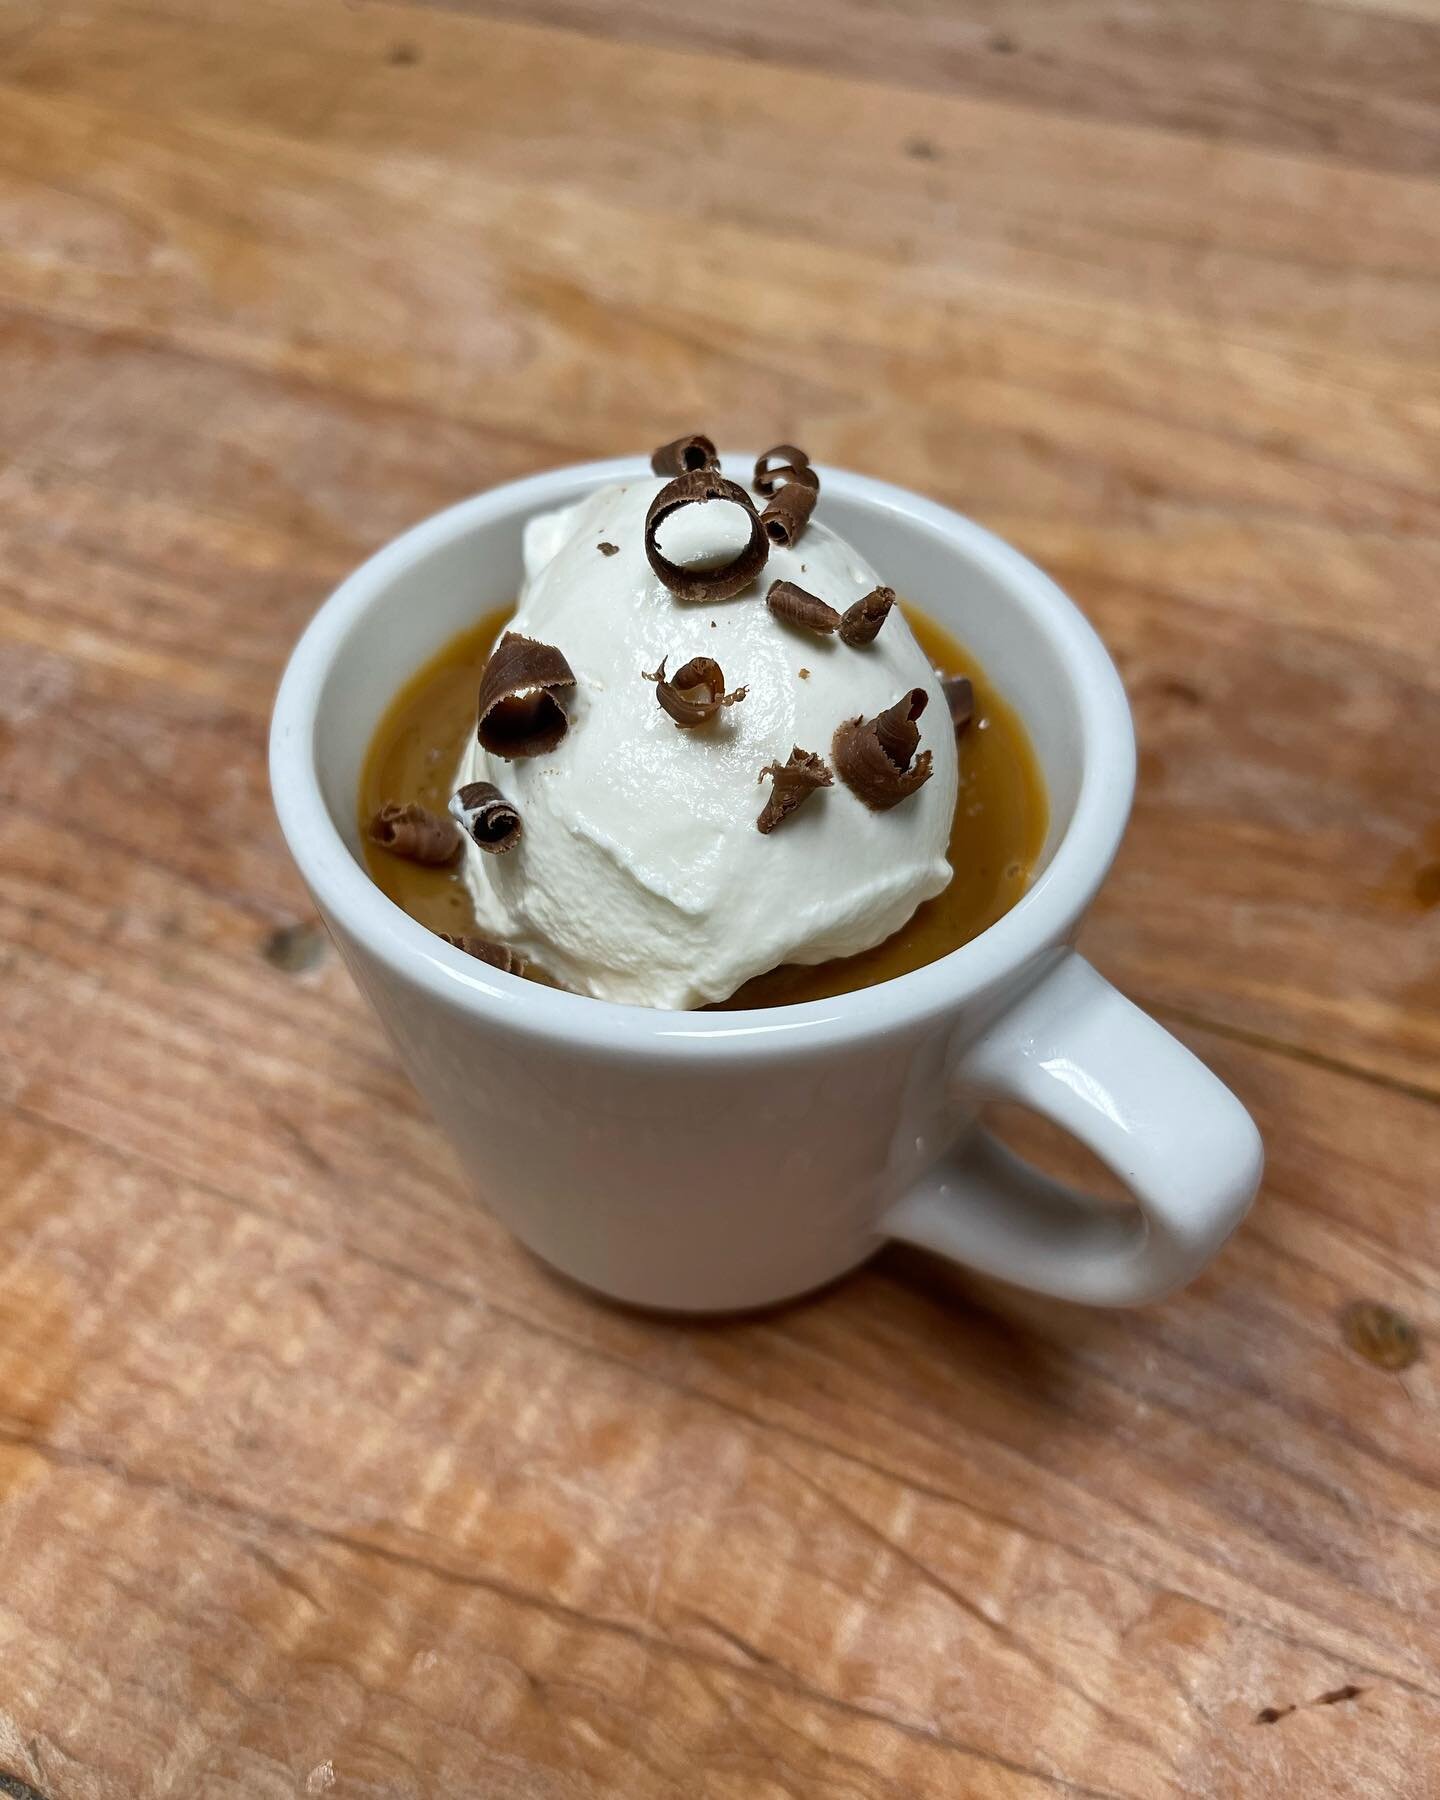 Treat your self to a chocolate pot de creme. 

Our incredible pastry chef has perfected this recipe, you don&rsquo;t want to miss this! Topped with homemade caramel, sea salt, fresh whipped cream and chocolate shavings.